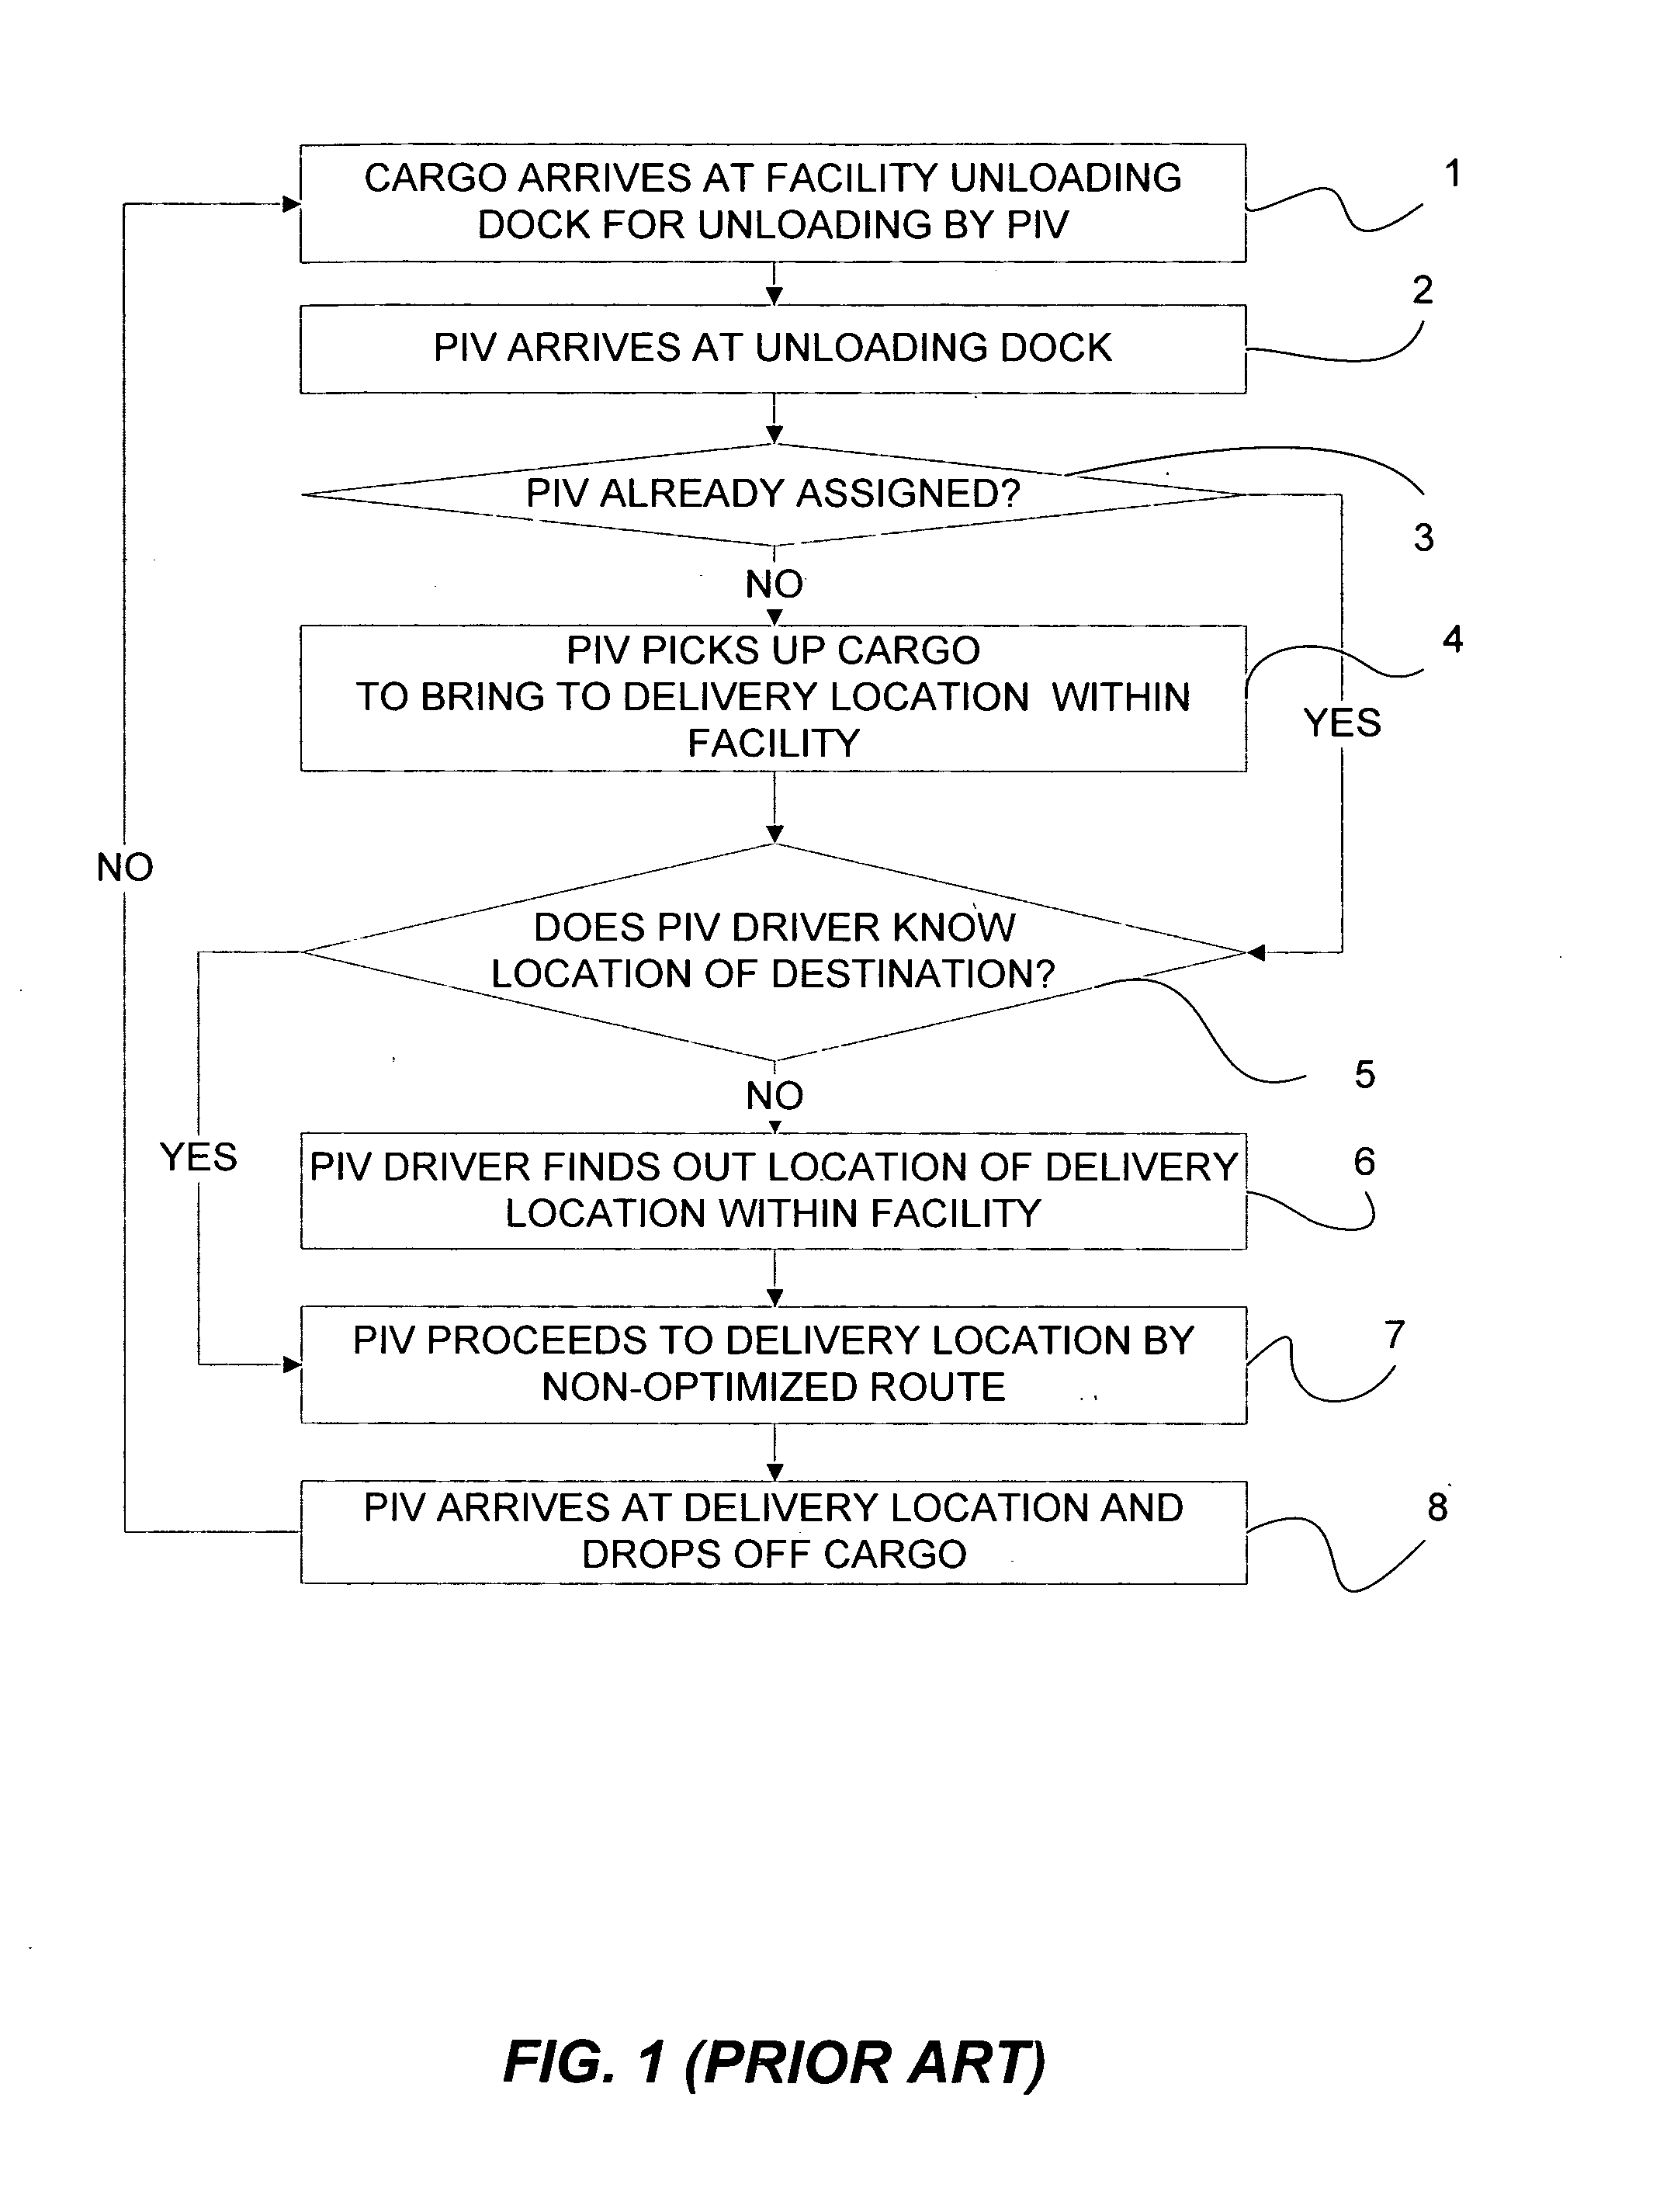 Systems and methods for creating routes for powered industrial vehicles